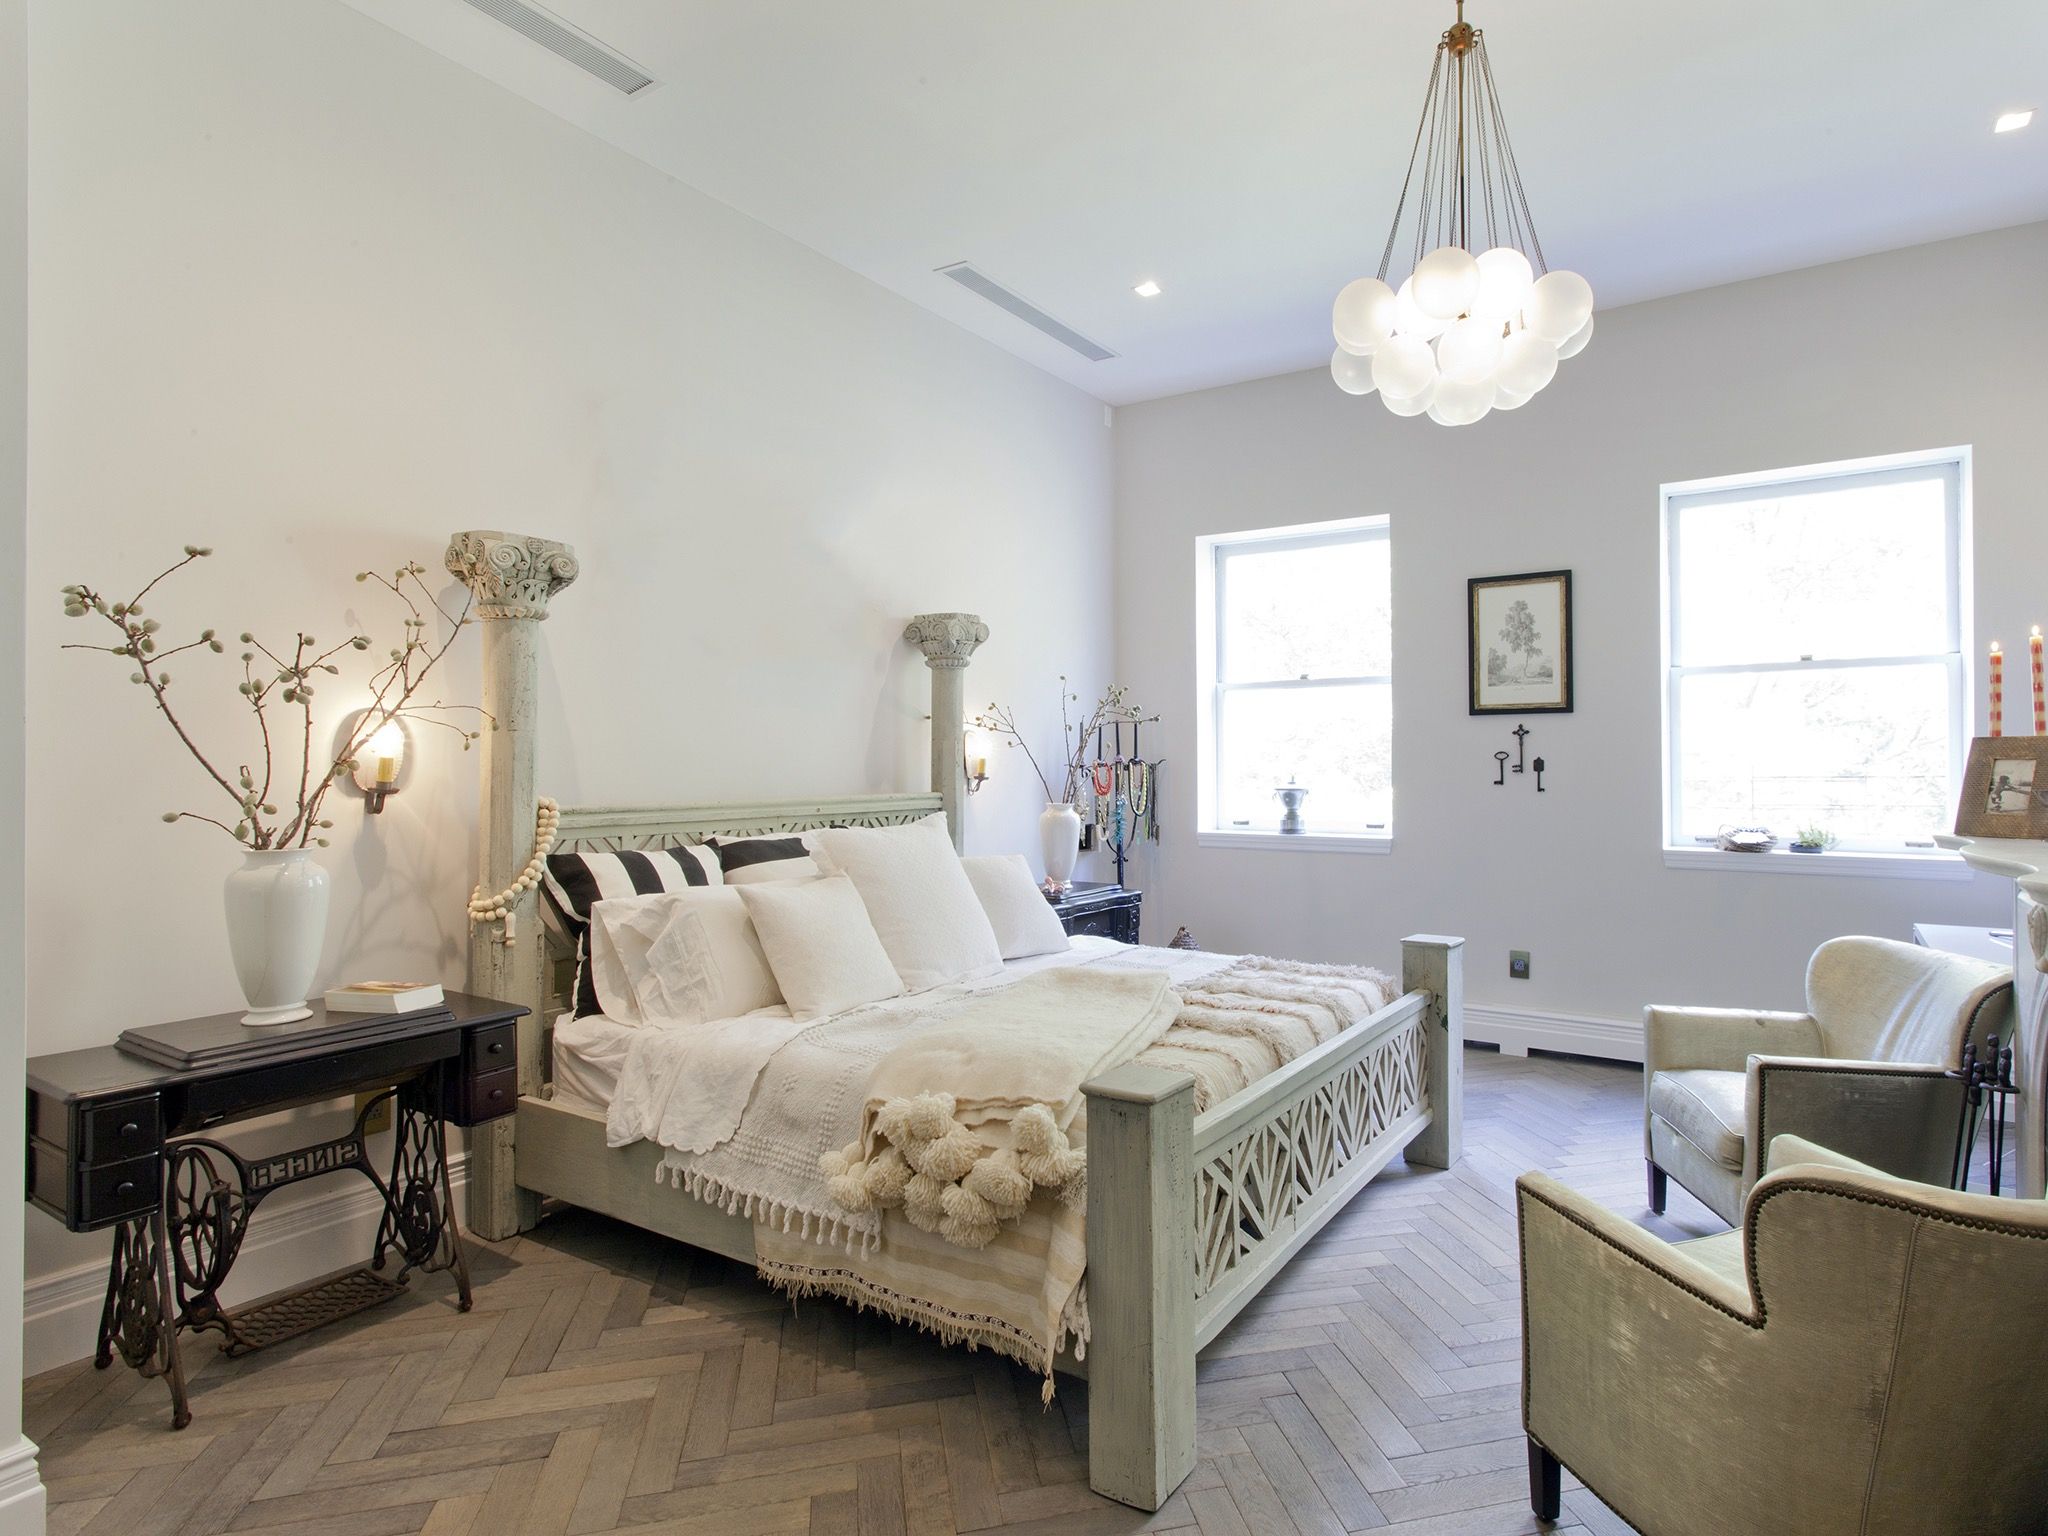 Indian Inspired Bedroom Interior In Neutral Color (View 14 of 30)